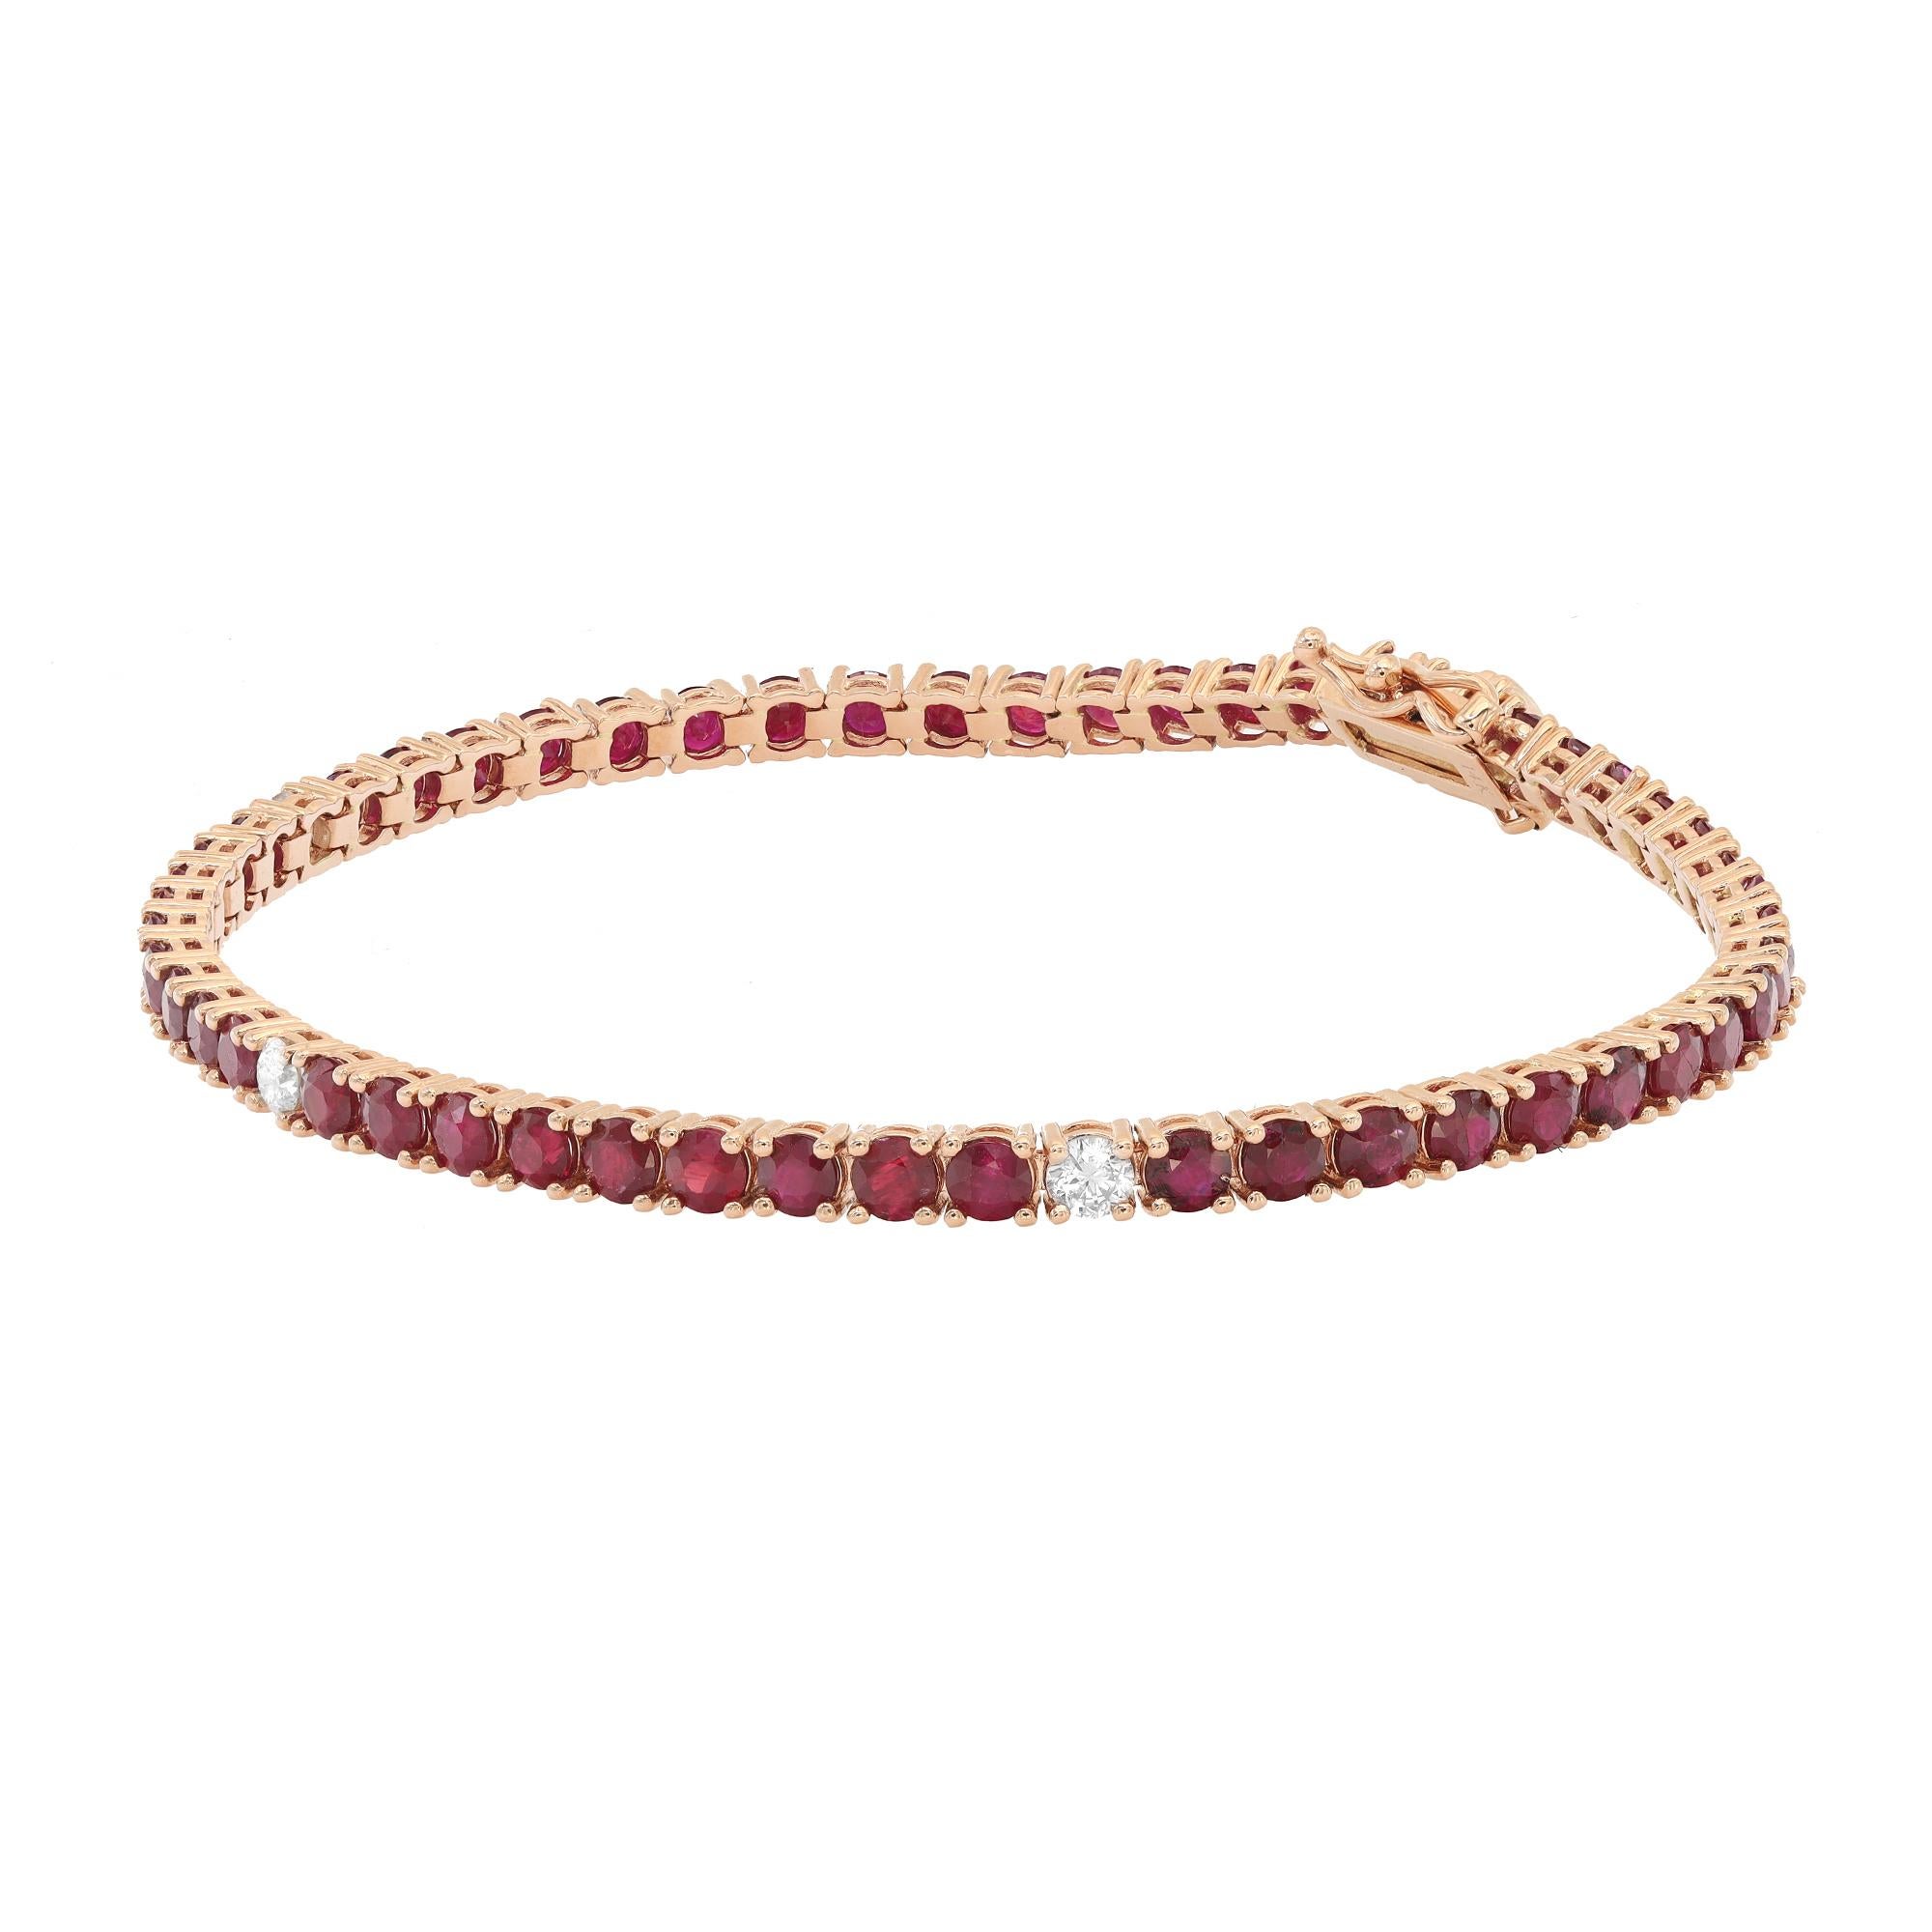 This beautifully crafted tennis bracelet features round cut Rubies and diamonds encrusted in four prong setting. Crafted in 14k yellow gold. Total diamond weight: 0.31 carat. Diamond Quality: G-H color and VS-SI clarity. Total ruby weight: 6.75